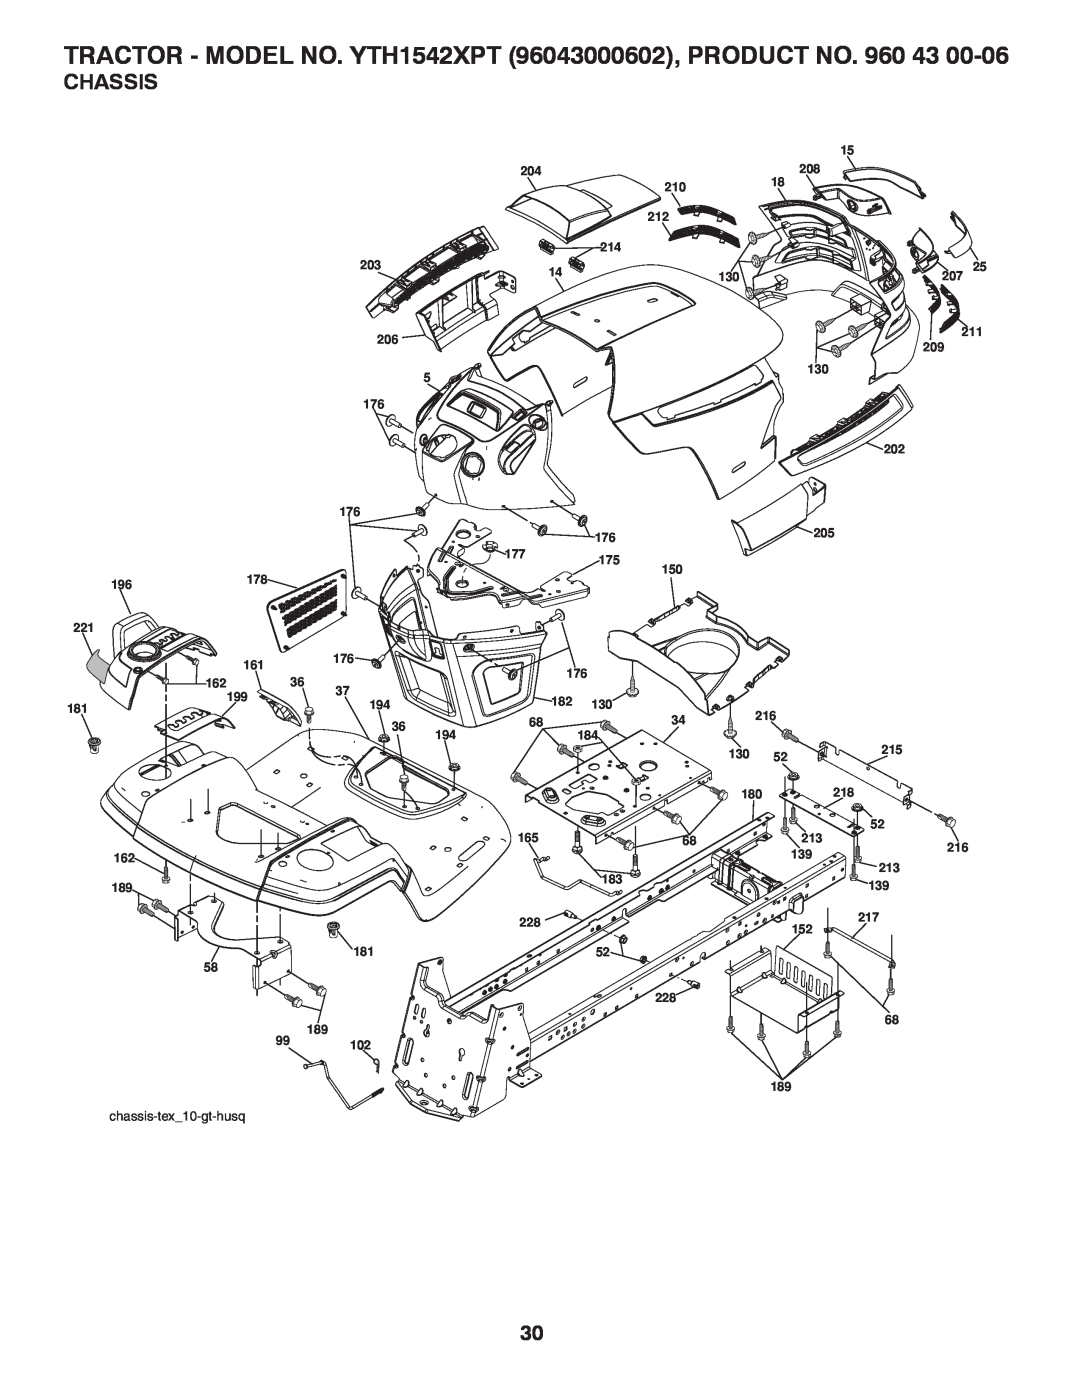 Husqvarna owner manual Chassis, TRACTOR - MODEL NO. YTH1542XPT 96043000602, PRODUCT NO. 960 43, chassis-tex10-gt-husq 